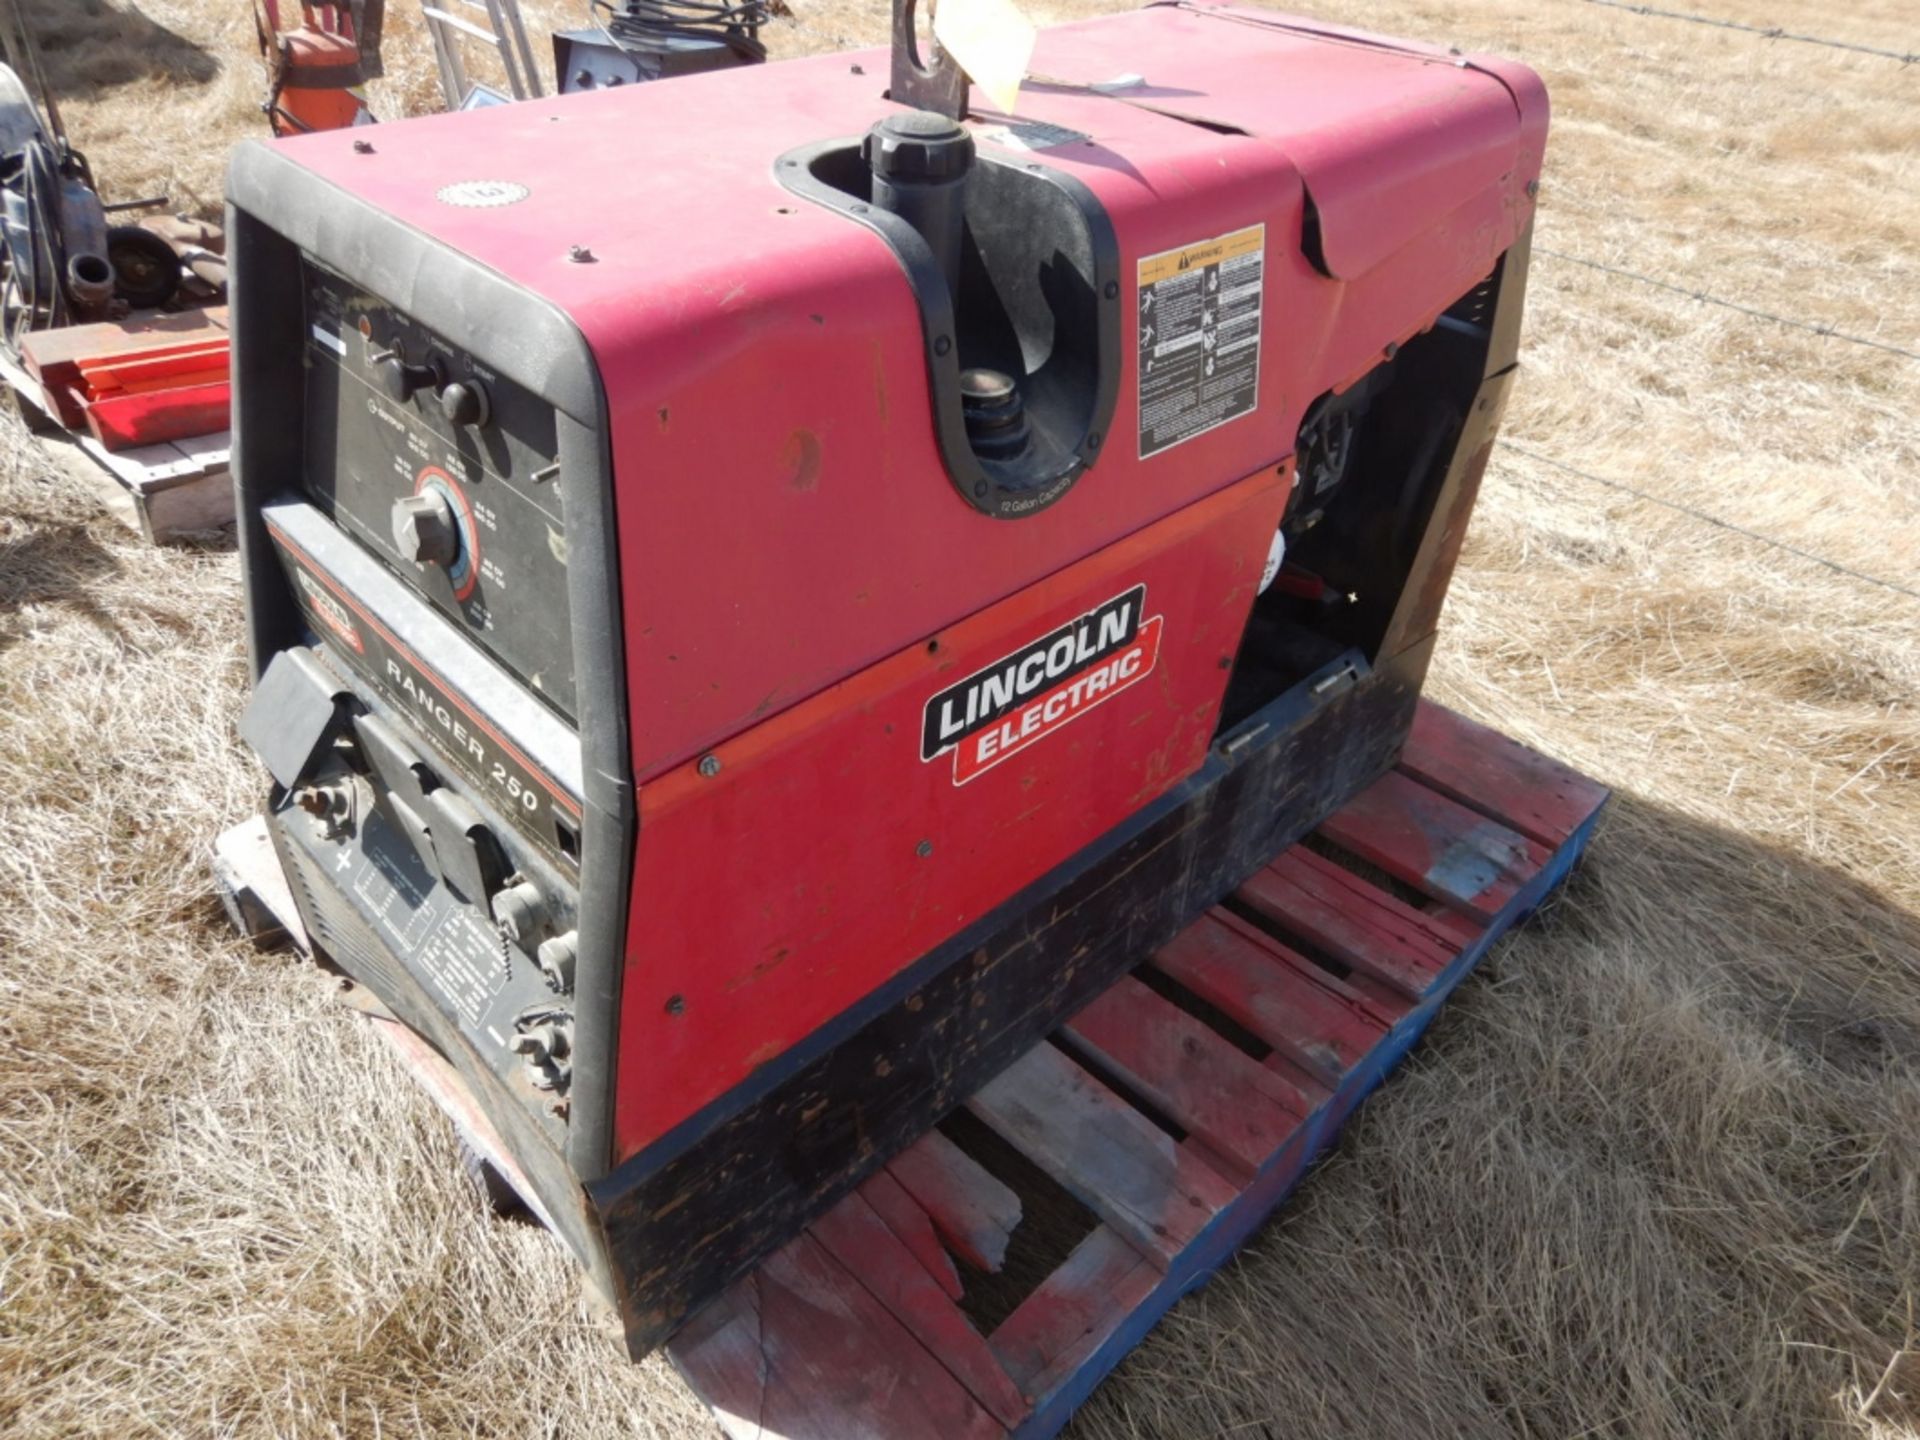 LINCOLN ELECTRIC RANGER 250 WELDER, RUNNING CONDITION, RECENT SERVICE - Image 2 of 5